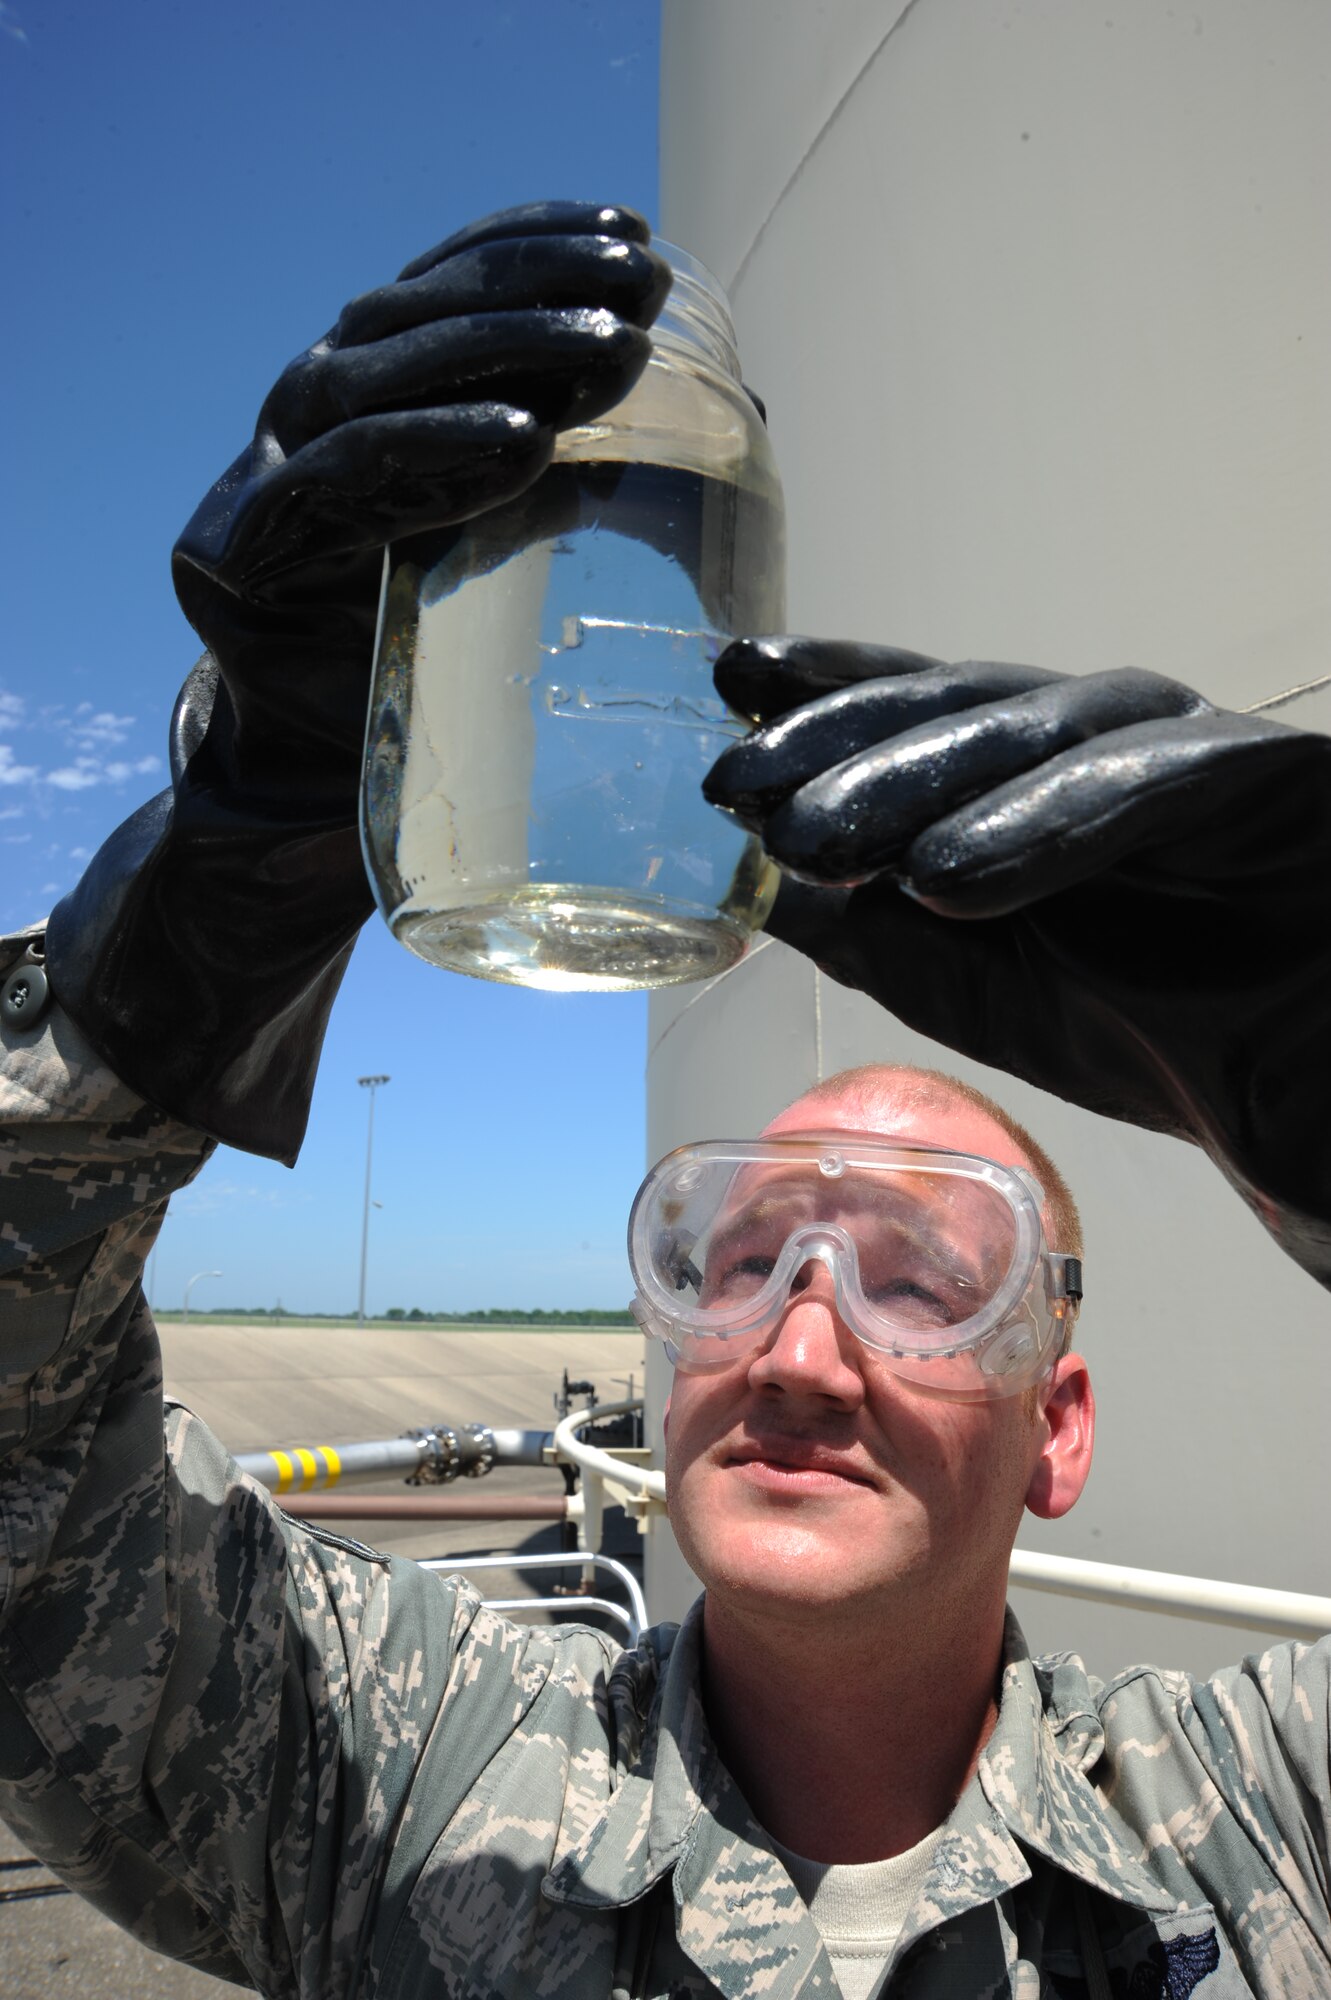 Staff Sgt. Matthew Tidball, 509th Logistics Readiness Squadron fuels hydrants supervisor, inspects a sample of JP-8 Jet Fuel at Whiteman Air Force Base, Mo., July 1, 2014. Before beginning to cross-train Tidball has worked as fuels distribution operator and supervisor, fuels service center technician, fuels accountant and his current job as fuels hydrants supervisor. (U.S. Air Force photo by Senior Airman Bryan Crane/Released)